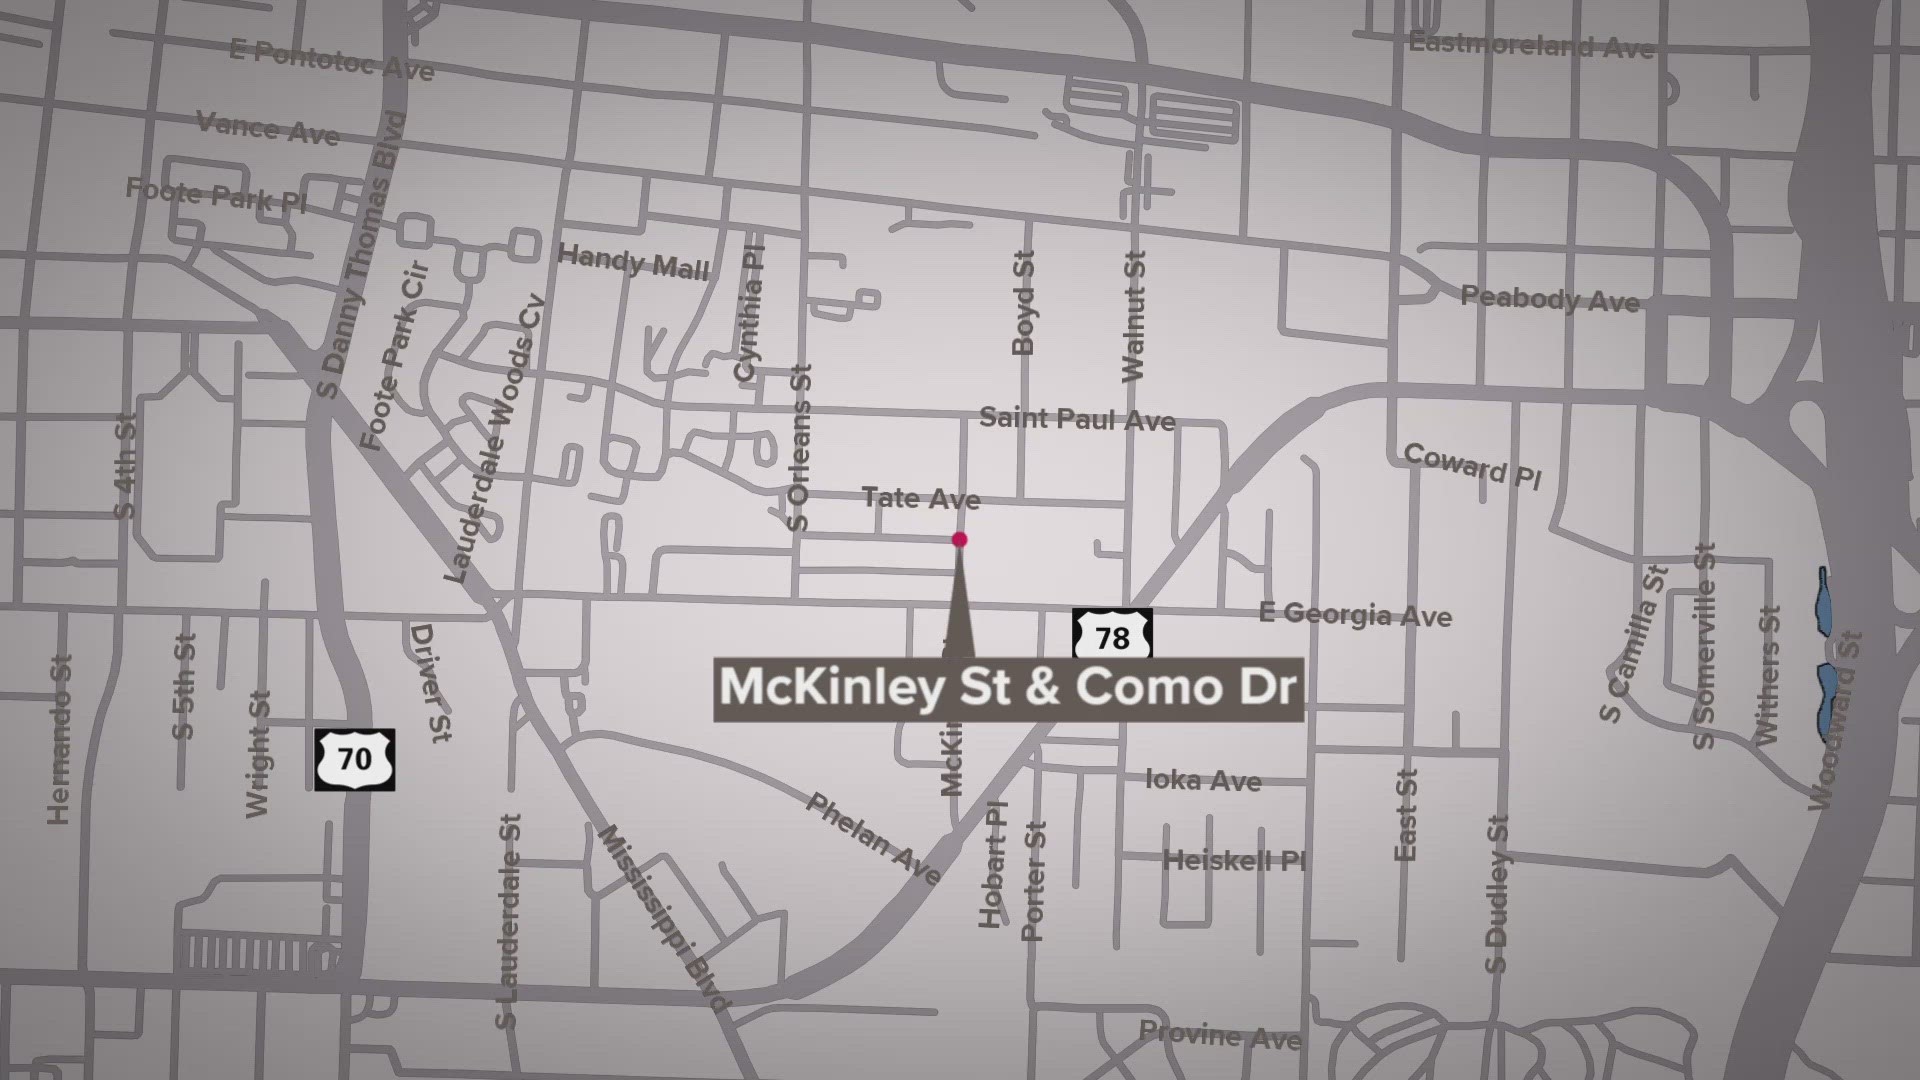 Officers said they responded to a shots-fired call at Como Drive and McKinley Street before finding the girl lying down in front of a house on Como.